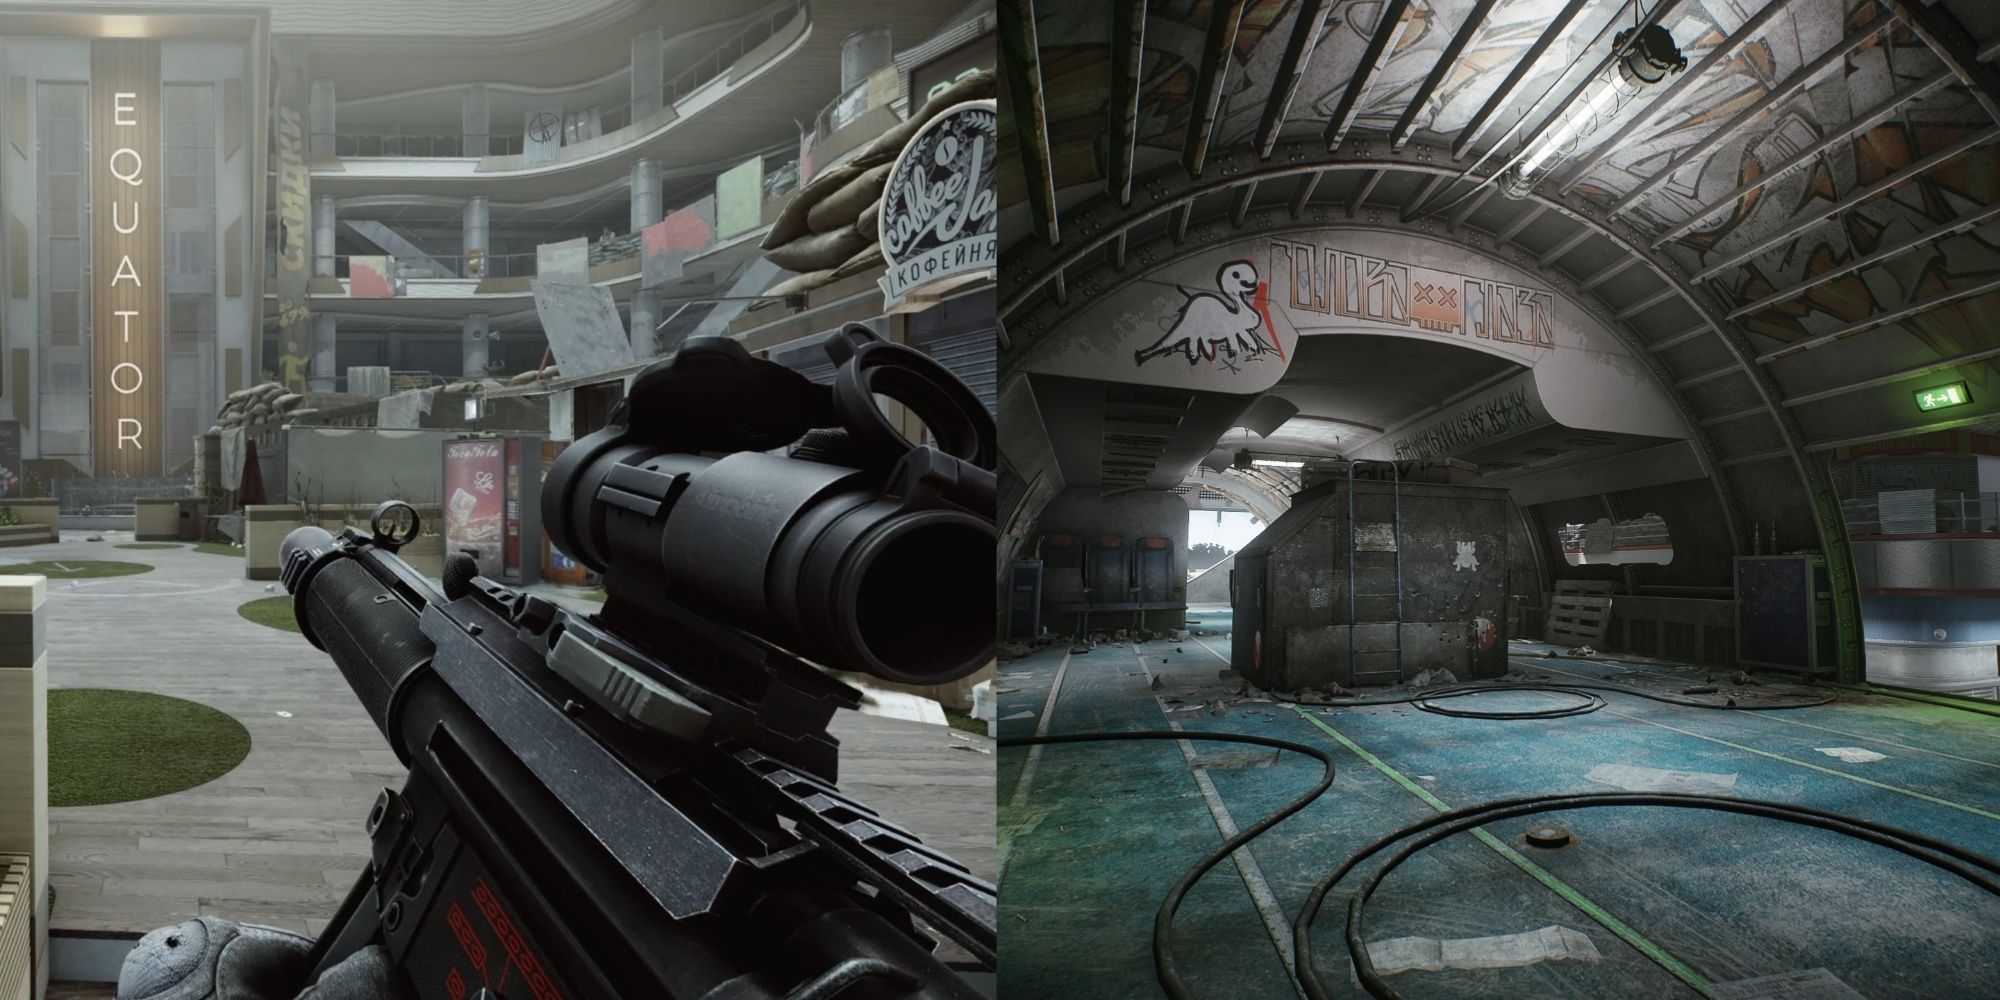 And MP5 in Equator and the airplane in Air Pit in Escape From Tarkov: Arena.